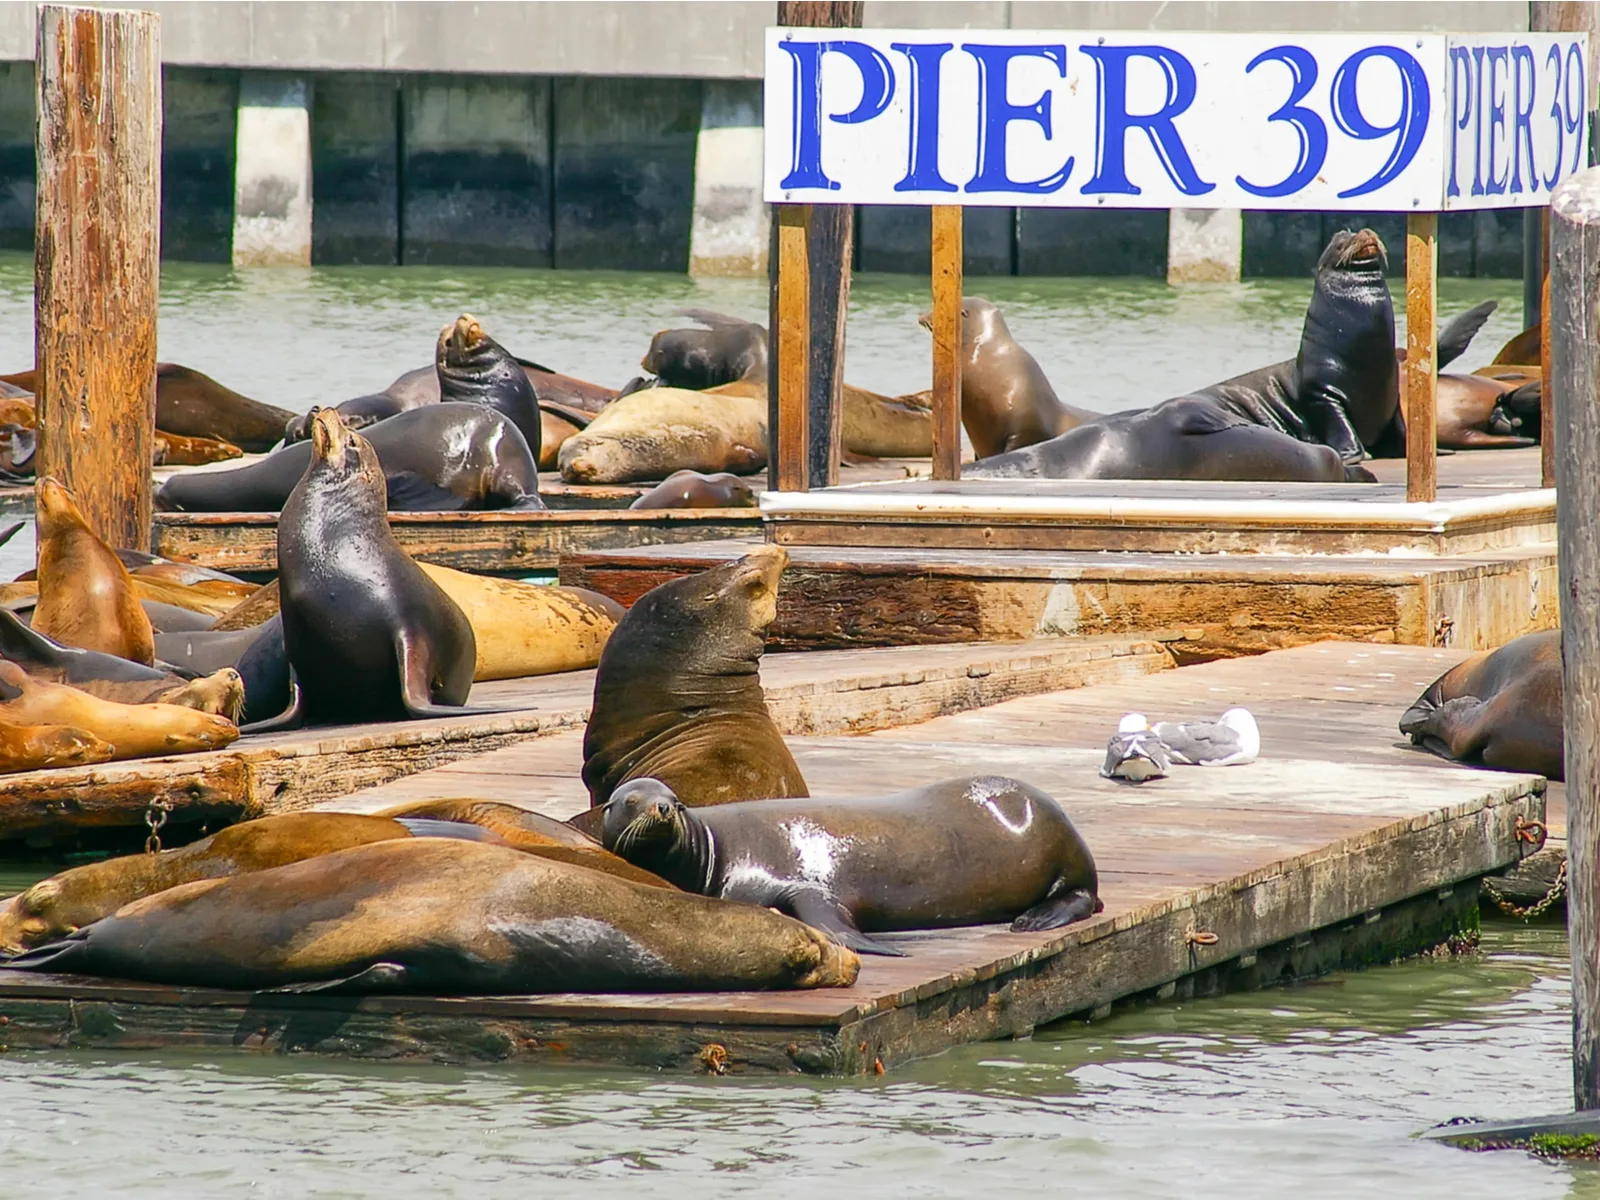 Sea lions on a dock at Pier 39 pictured on a rainy day during the worst time to visit San Francisco